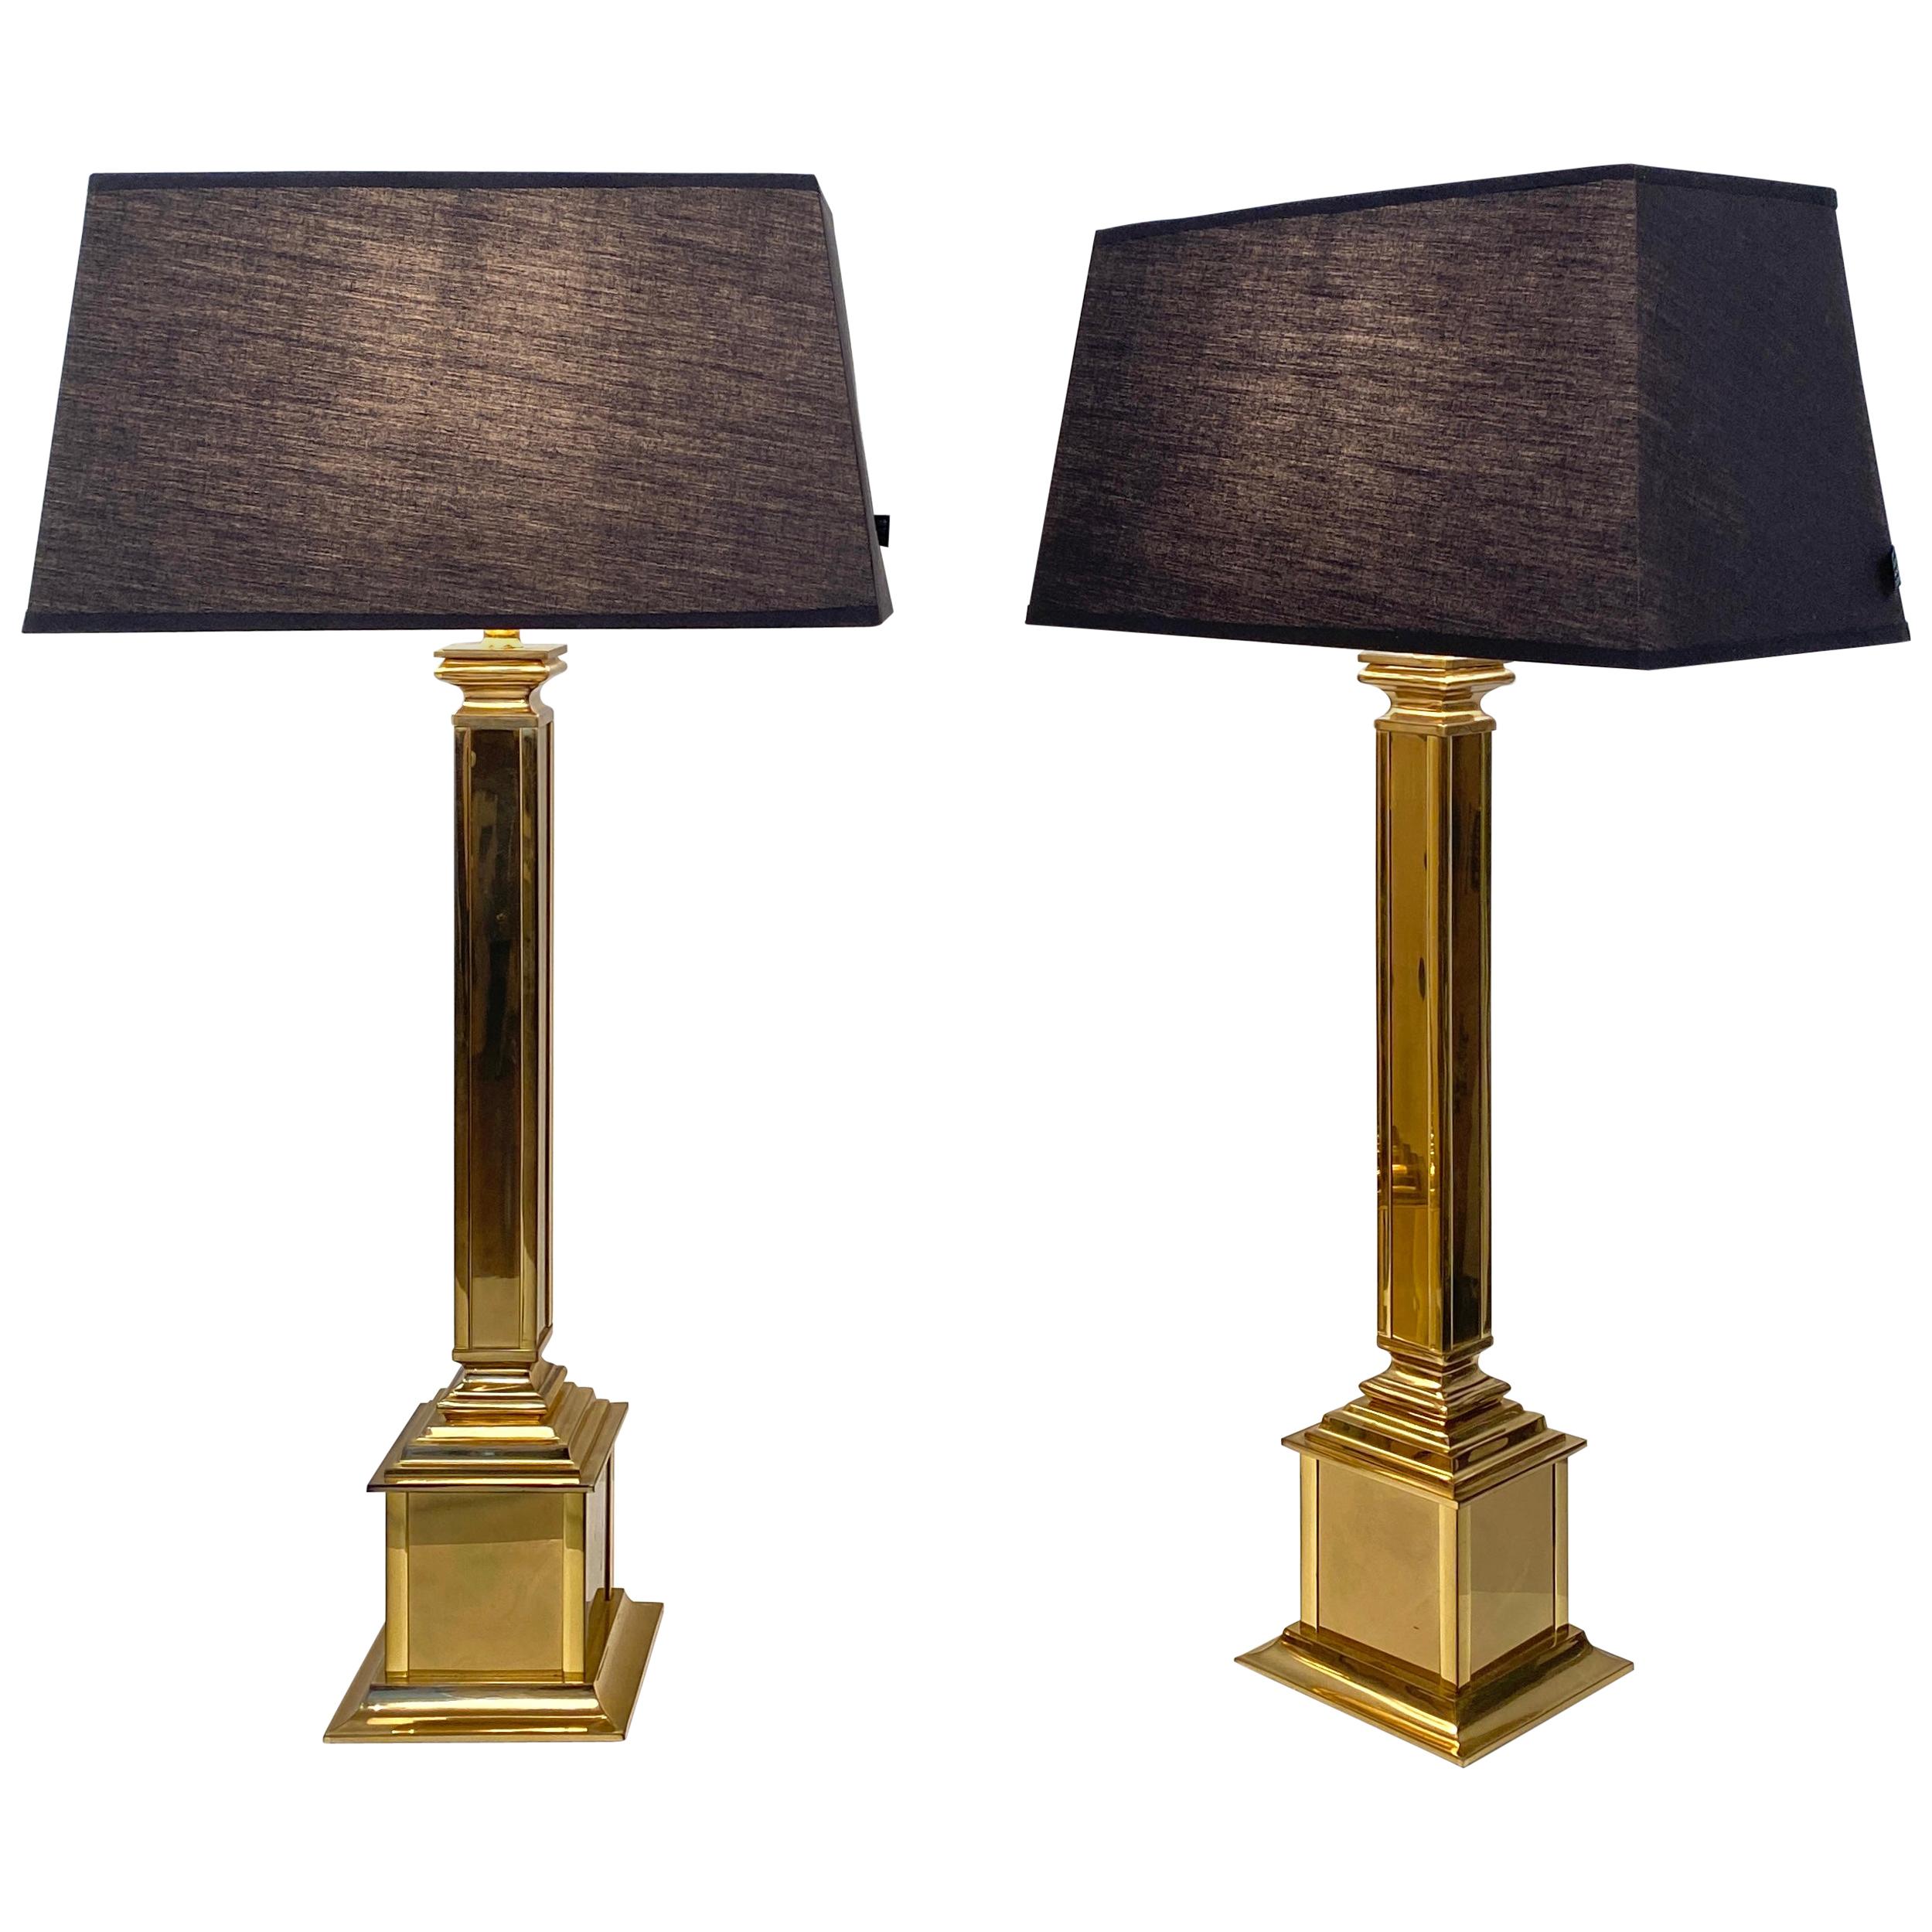 Pair of German Midcentury Gilded Brass Table Lamps with Black Lamp Shades, 1970